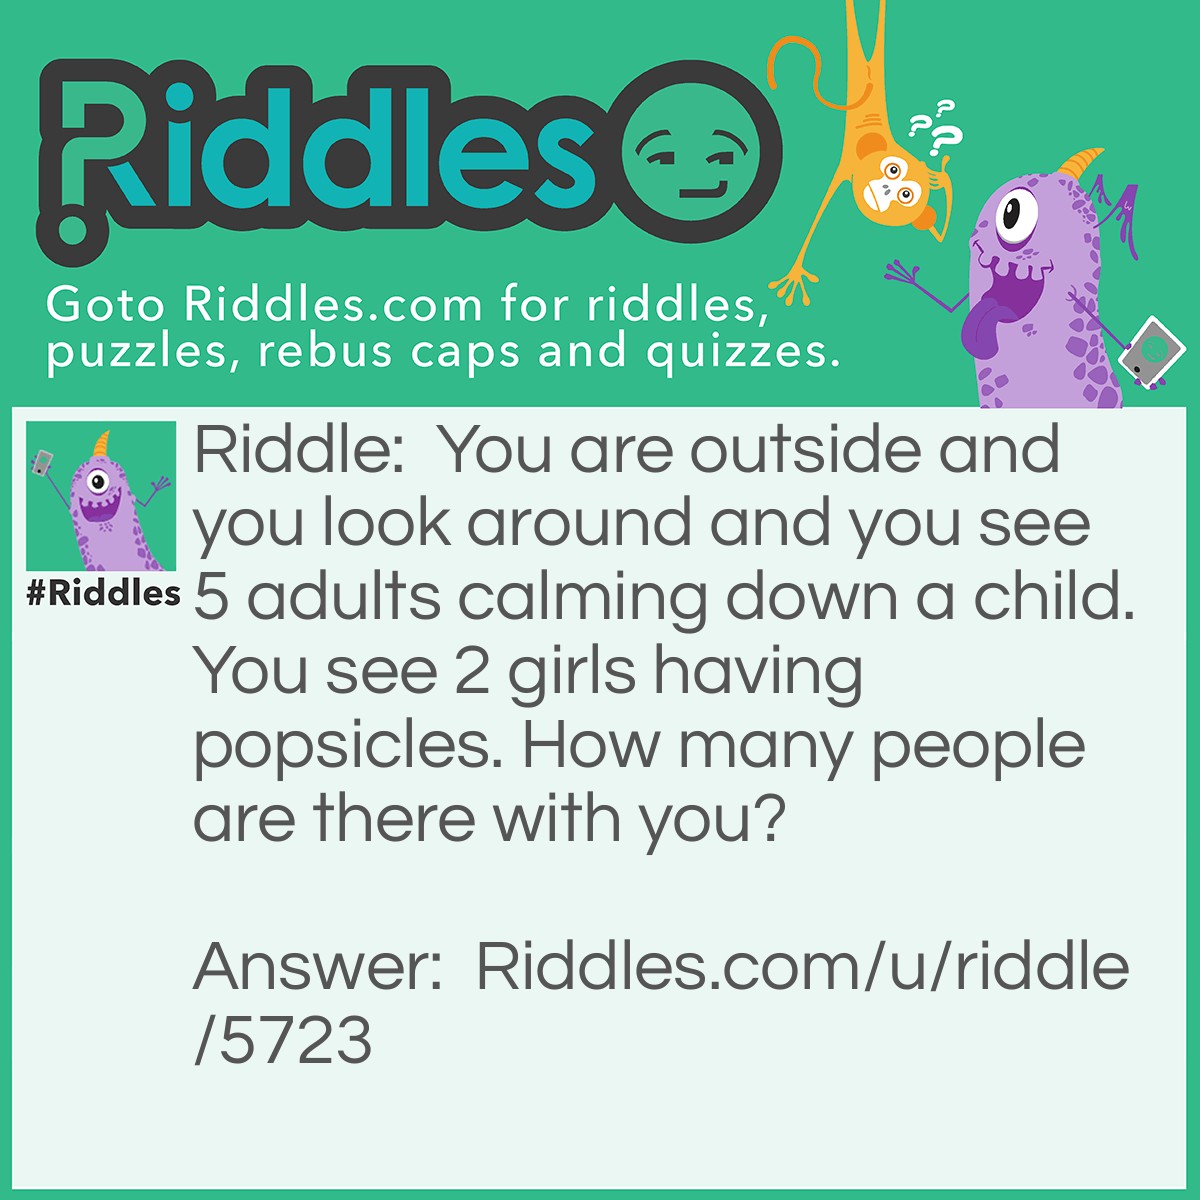 Riddle: You are outside and you look around and you see 5 adults calming down a child. You see 2 girls having popsicles. How many people are there with you? Answer: Only you, the other people are hanging out with somebody else, you are forever alone.